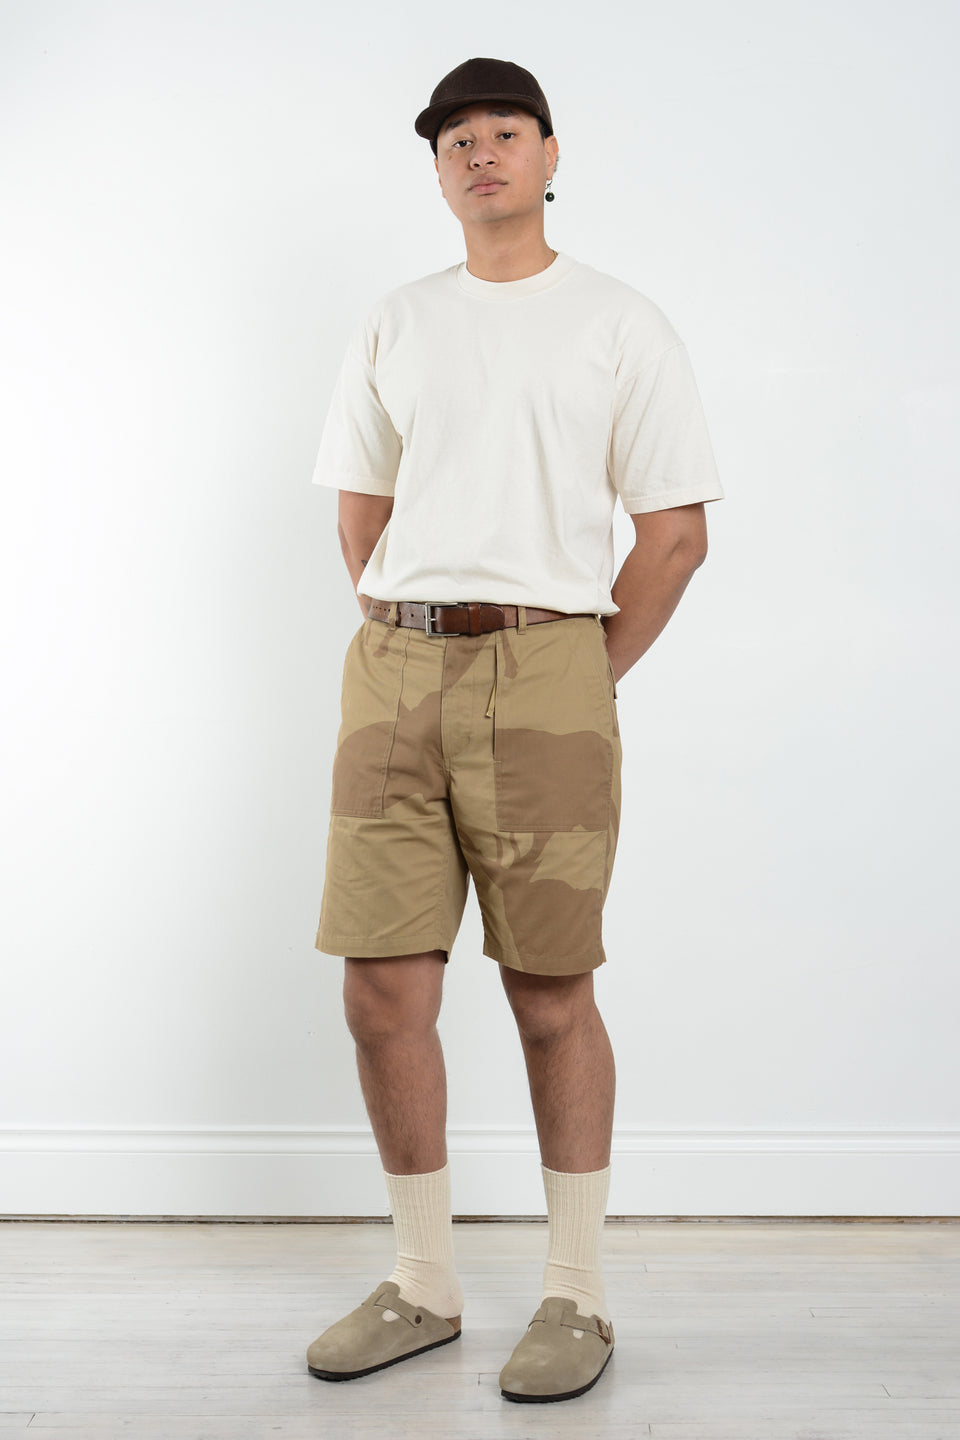 Engineered Garments SS22 Nepenthes New York Fatigue Short Khaki Animal Print Cotton Flat Twill Calculus Victoria BC Canada